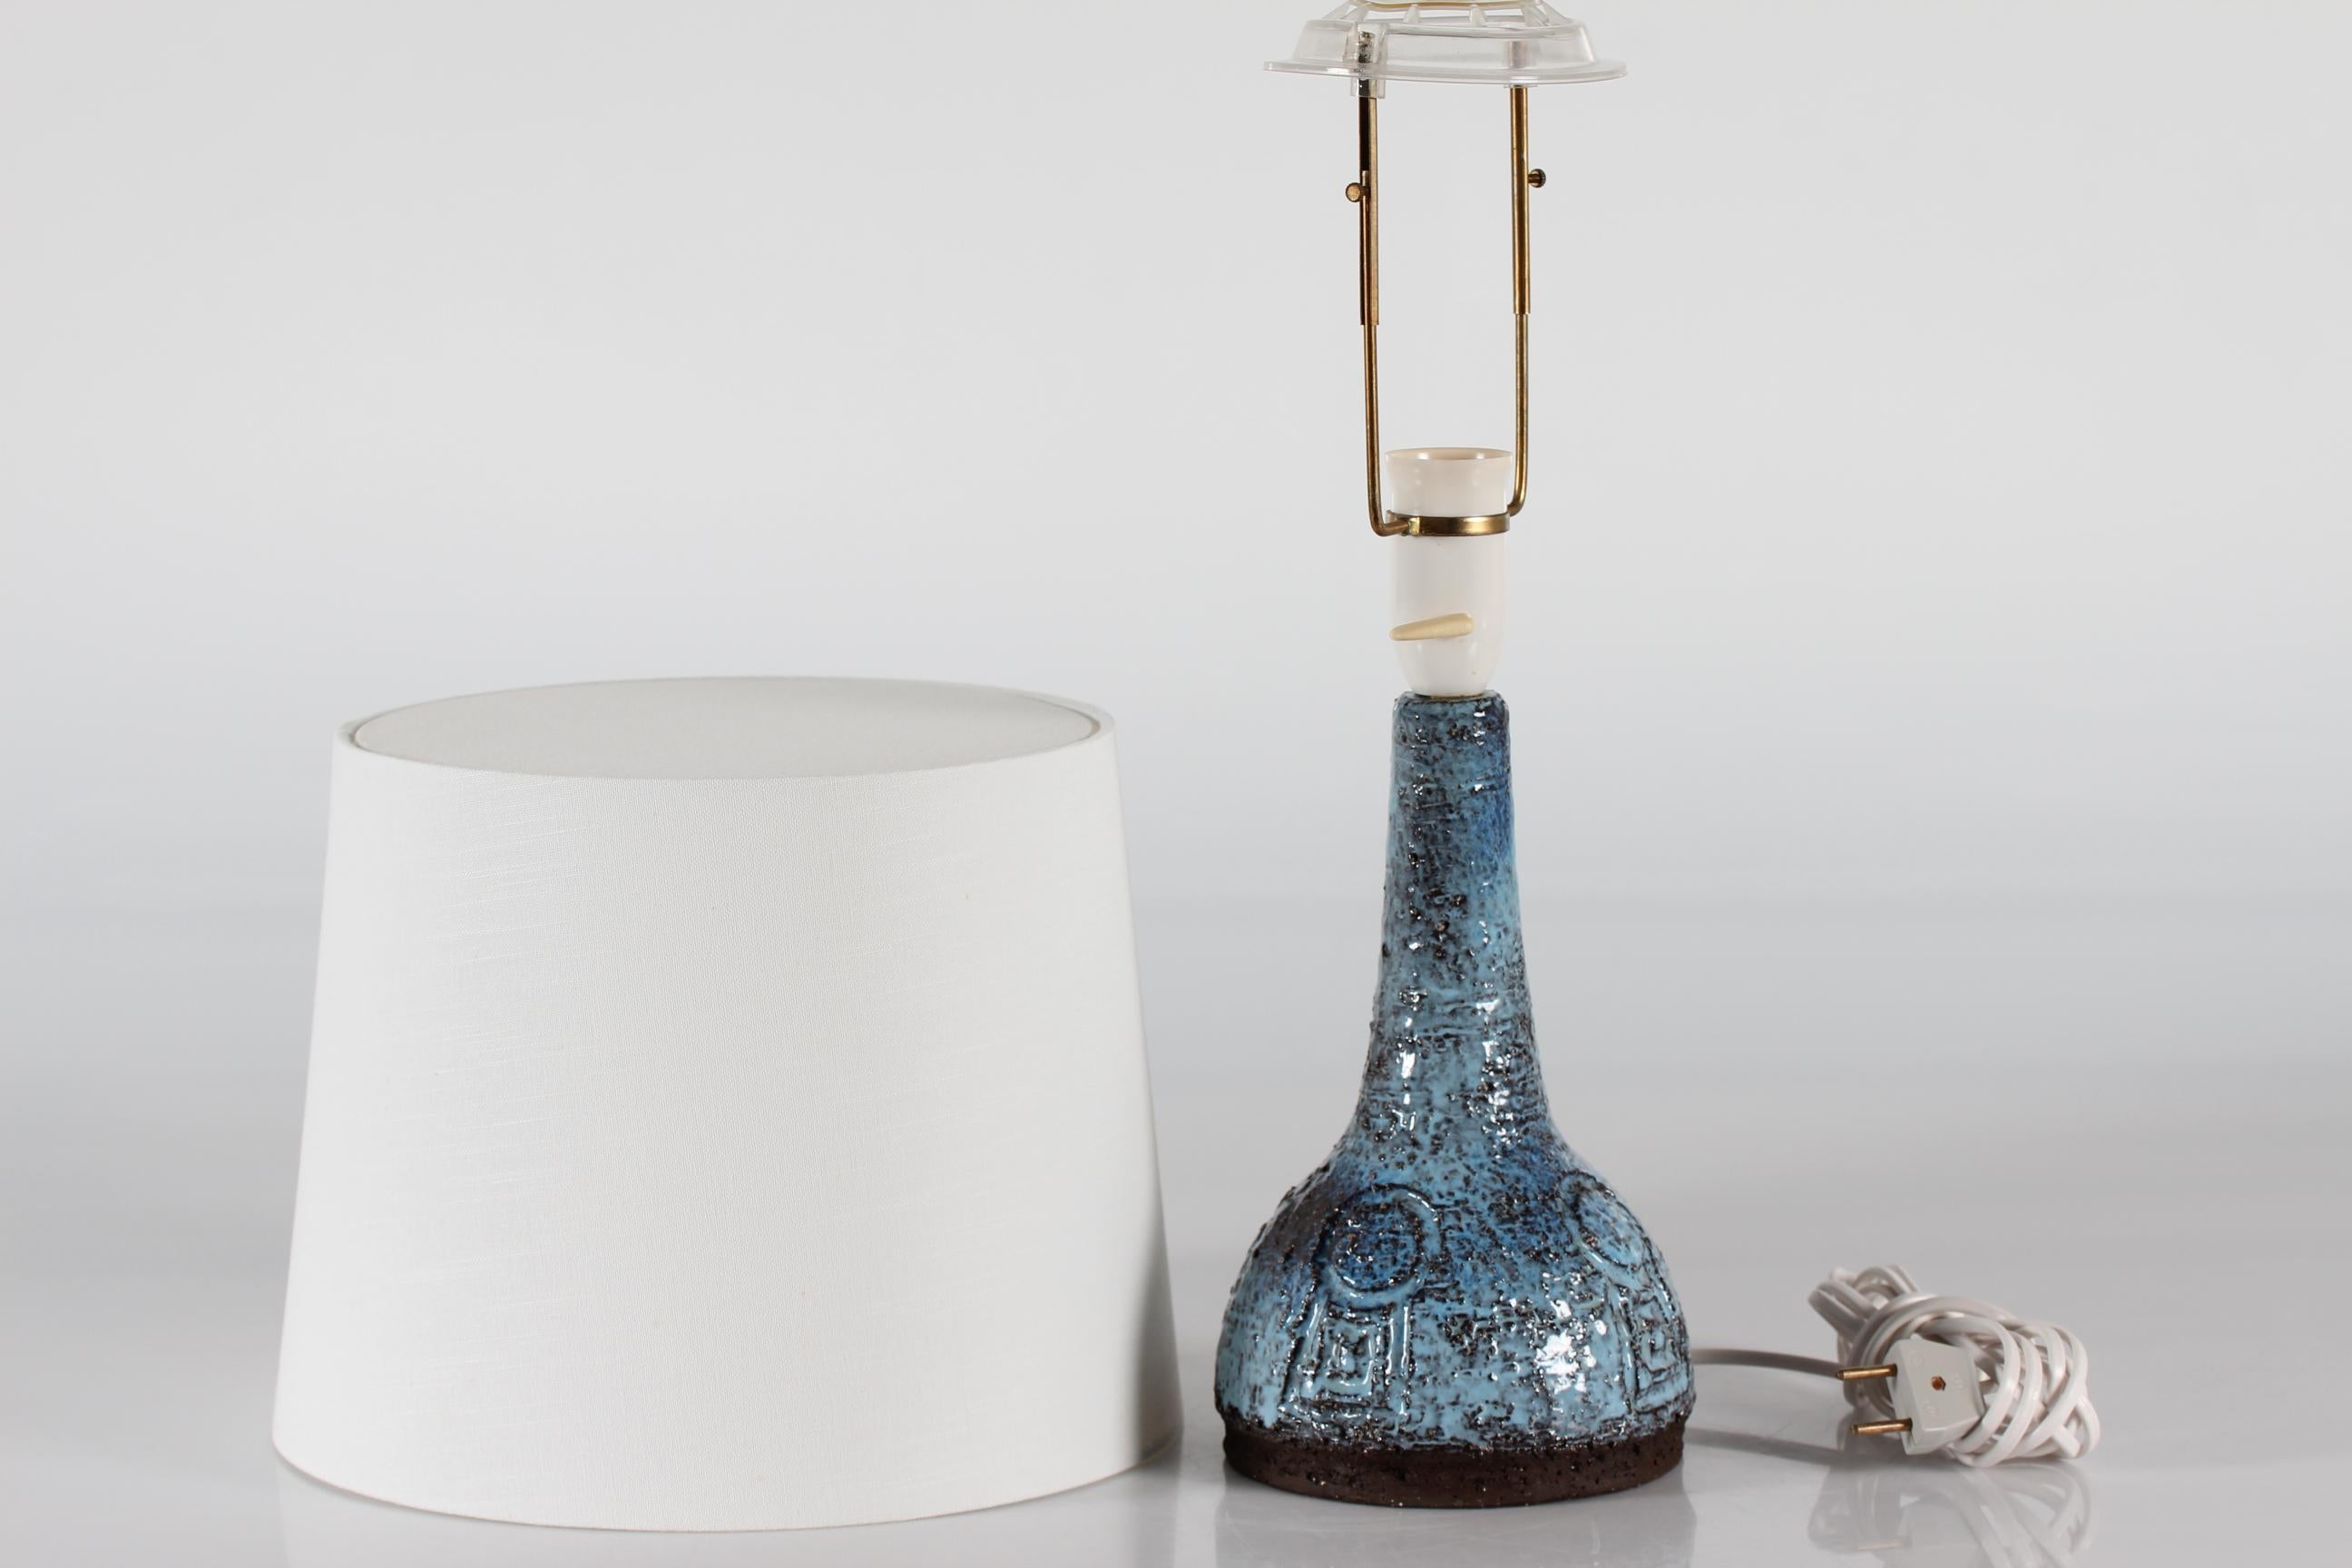 Danish Brutalist Ceramic Table Lamp by Artist Sejer with Blue Glaze Unica 1970s For Sale 2